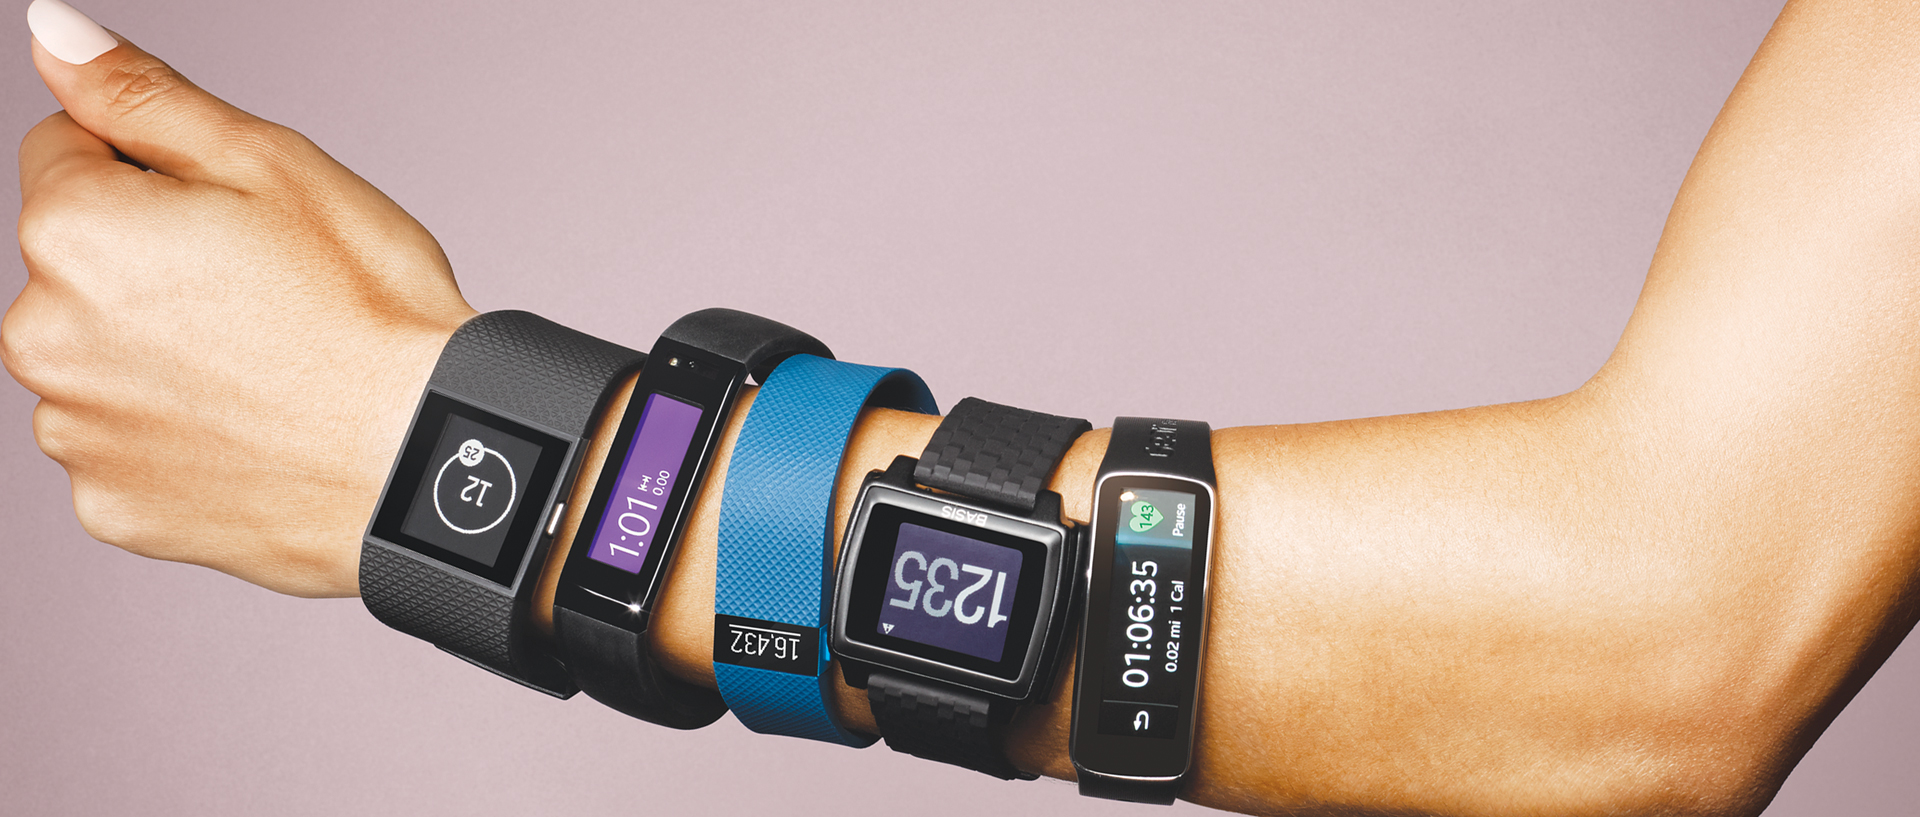 The Downsides of Fitness Trackers